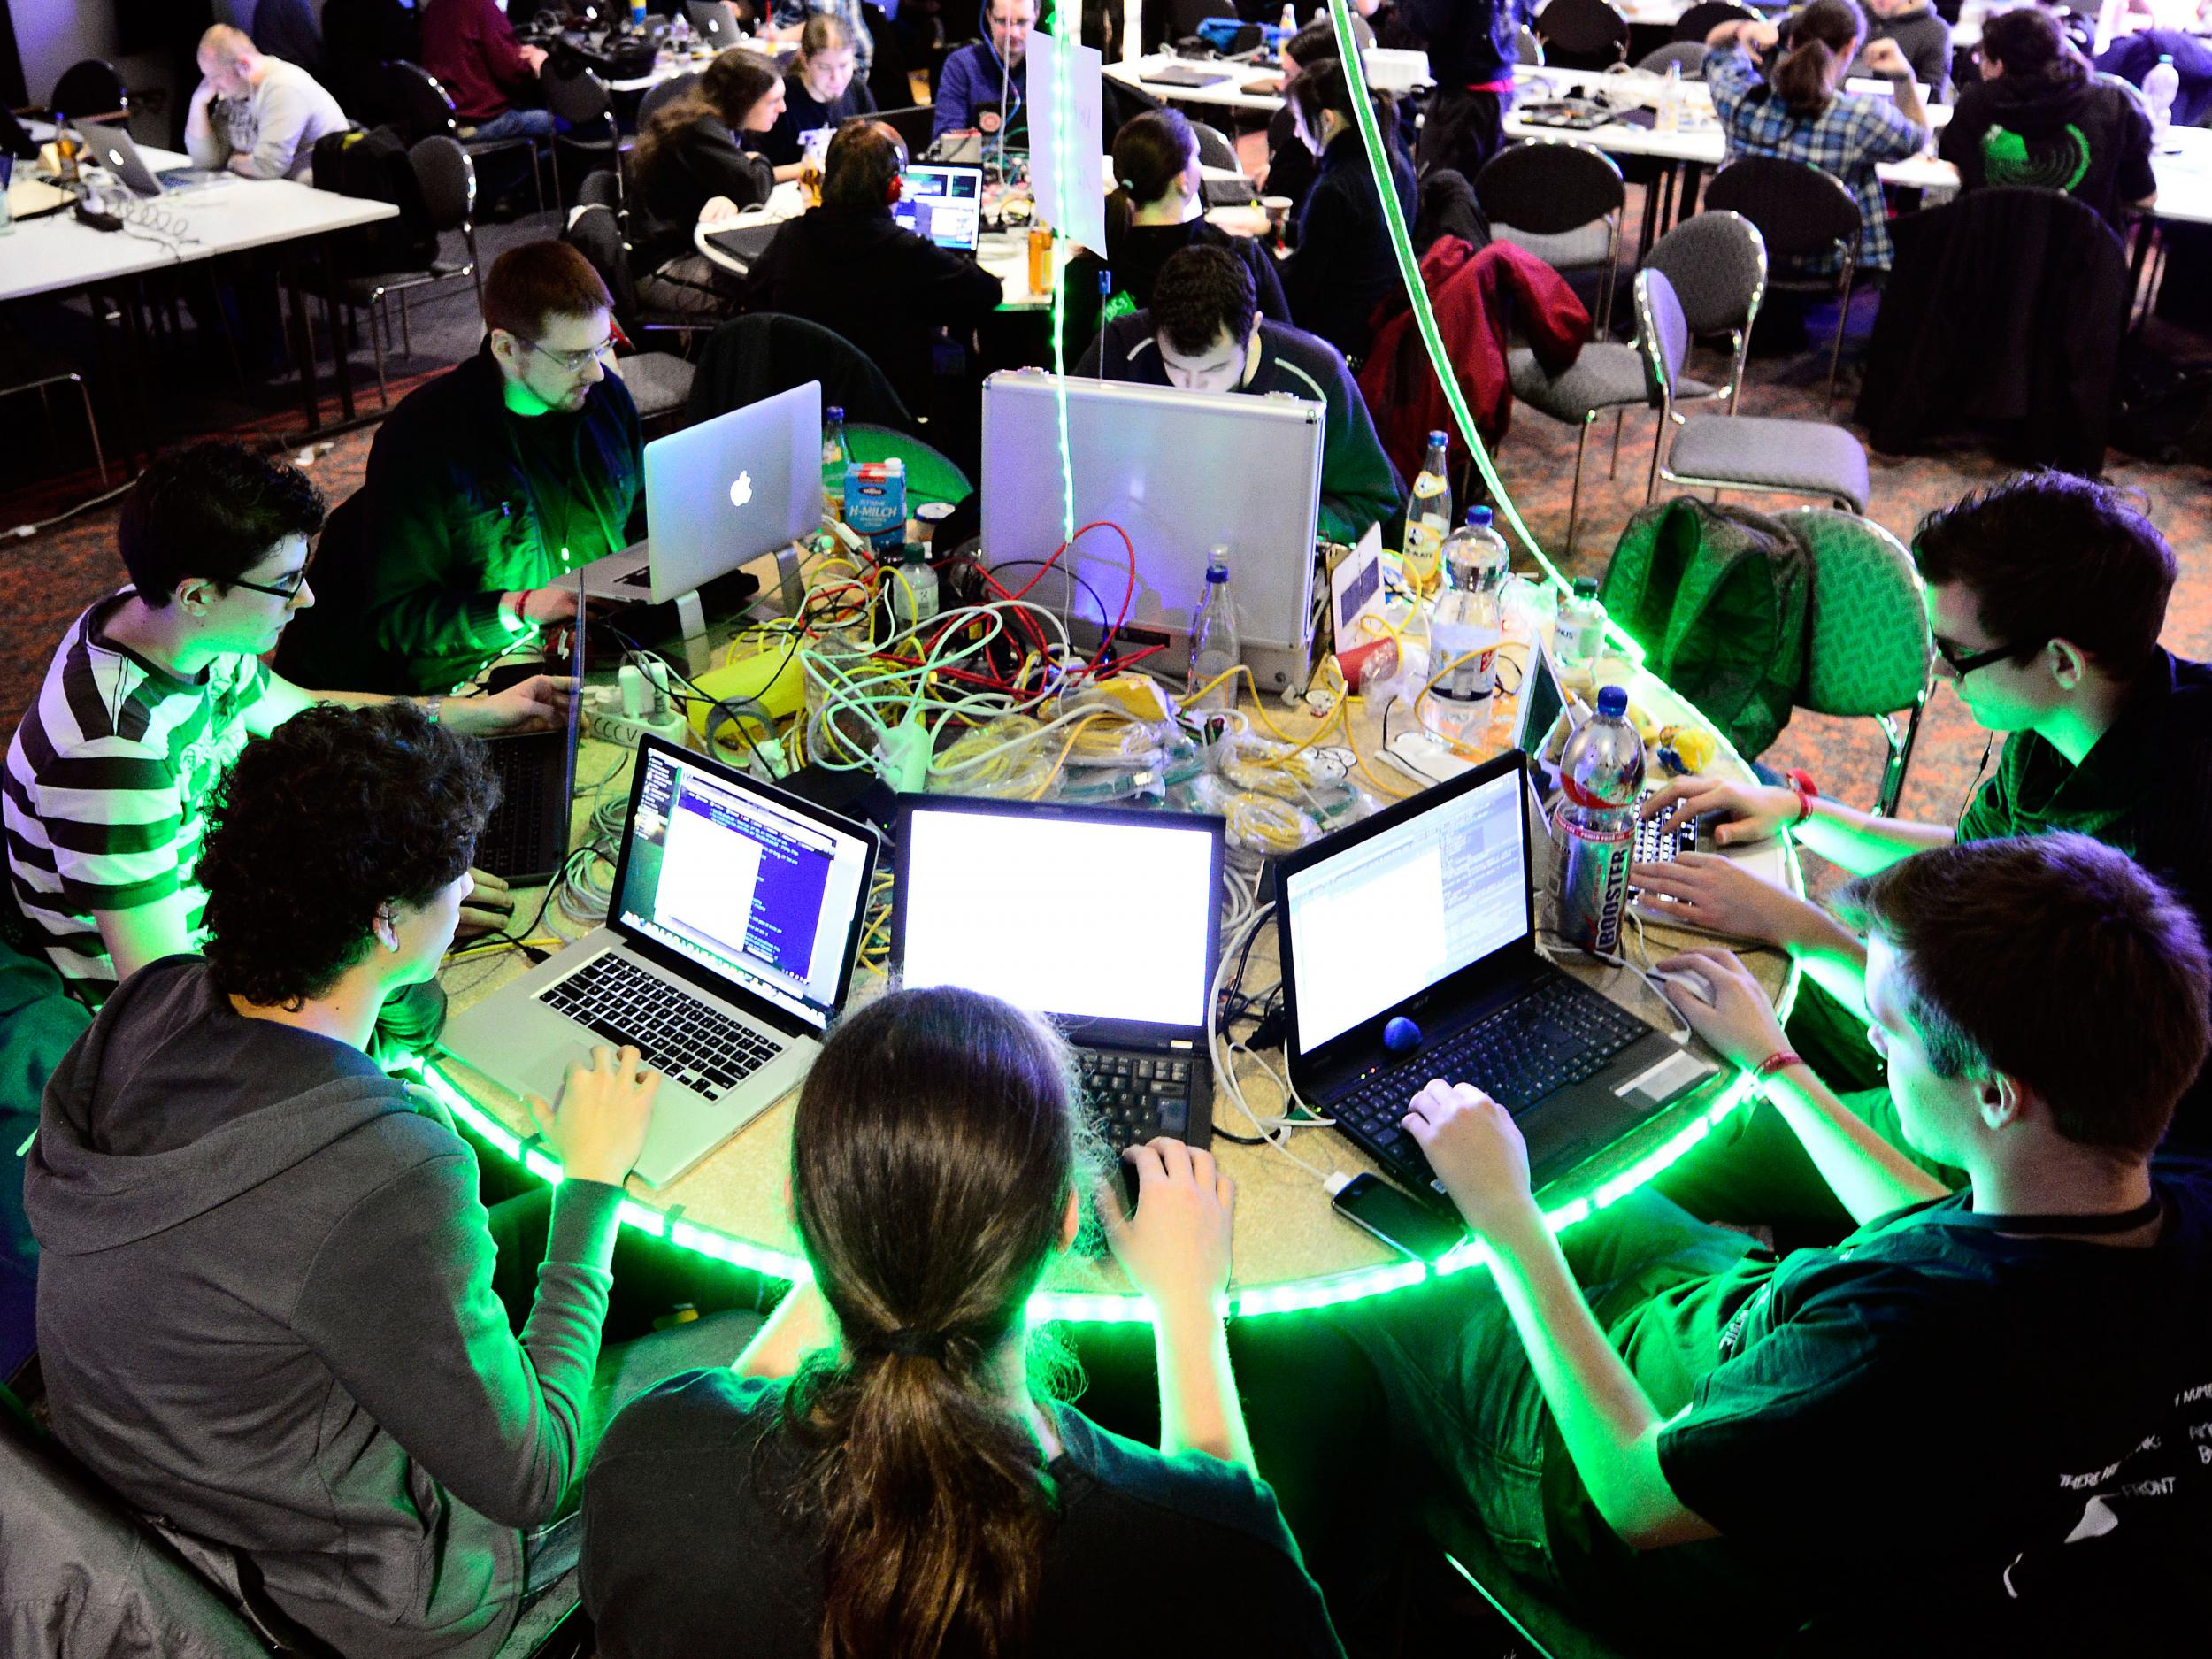 Participants work at their laptops at the annual Chaos Computer Club (CCC) computer hackers' congress in Hamburg in 2012